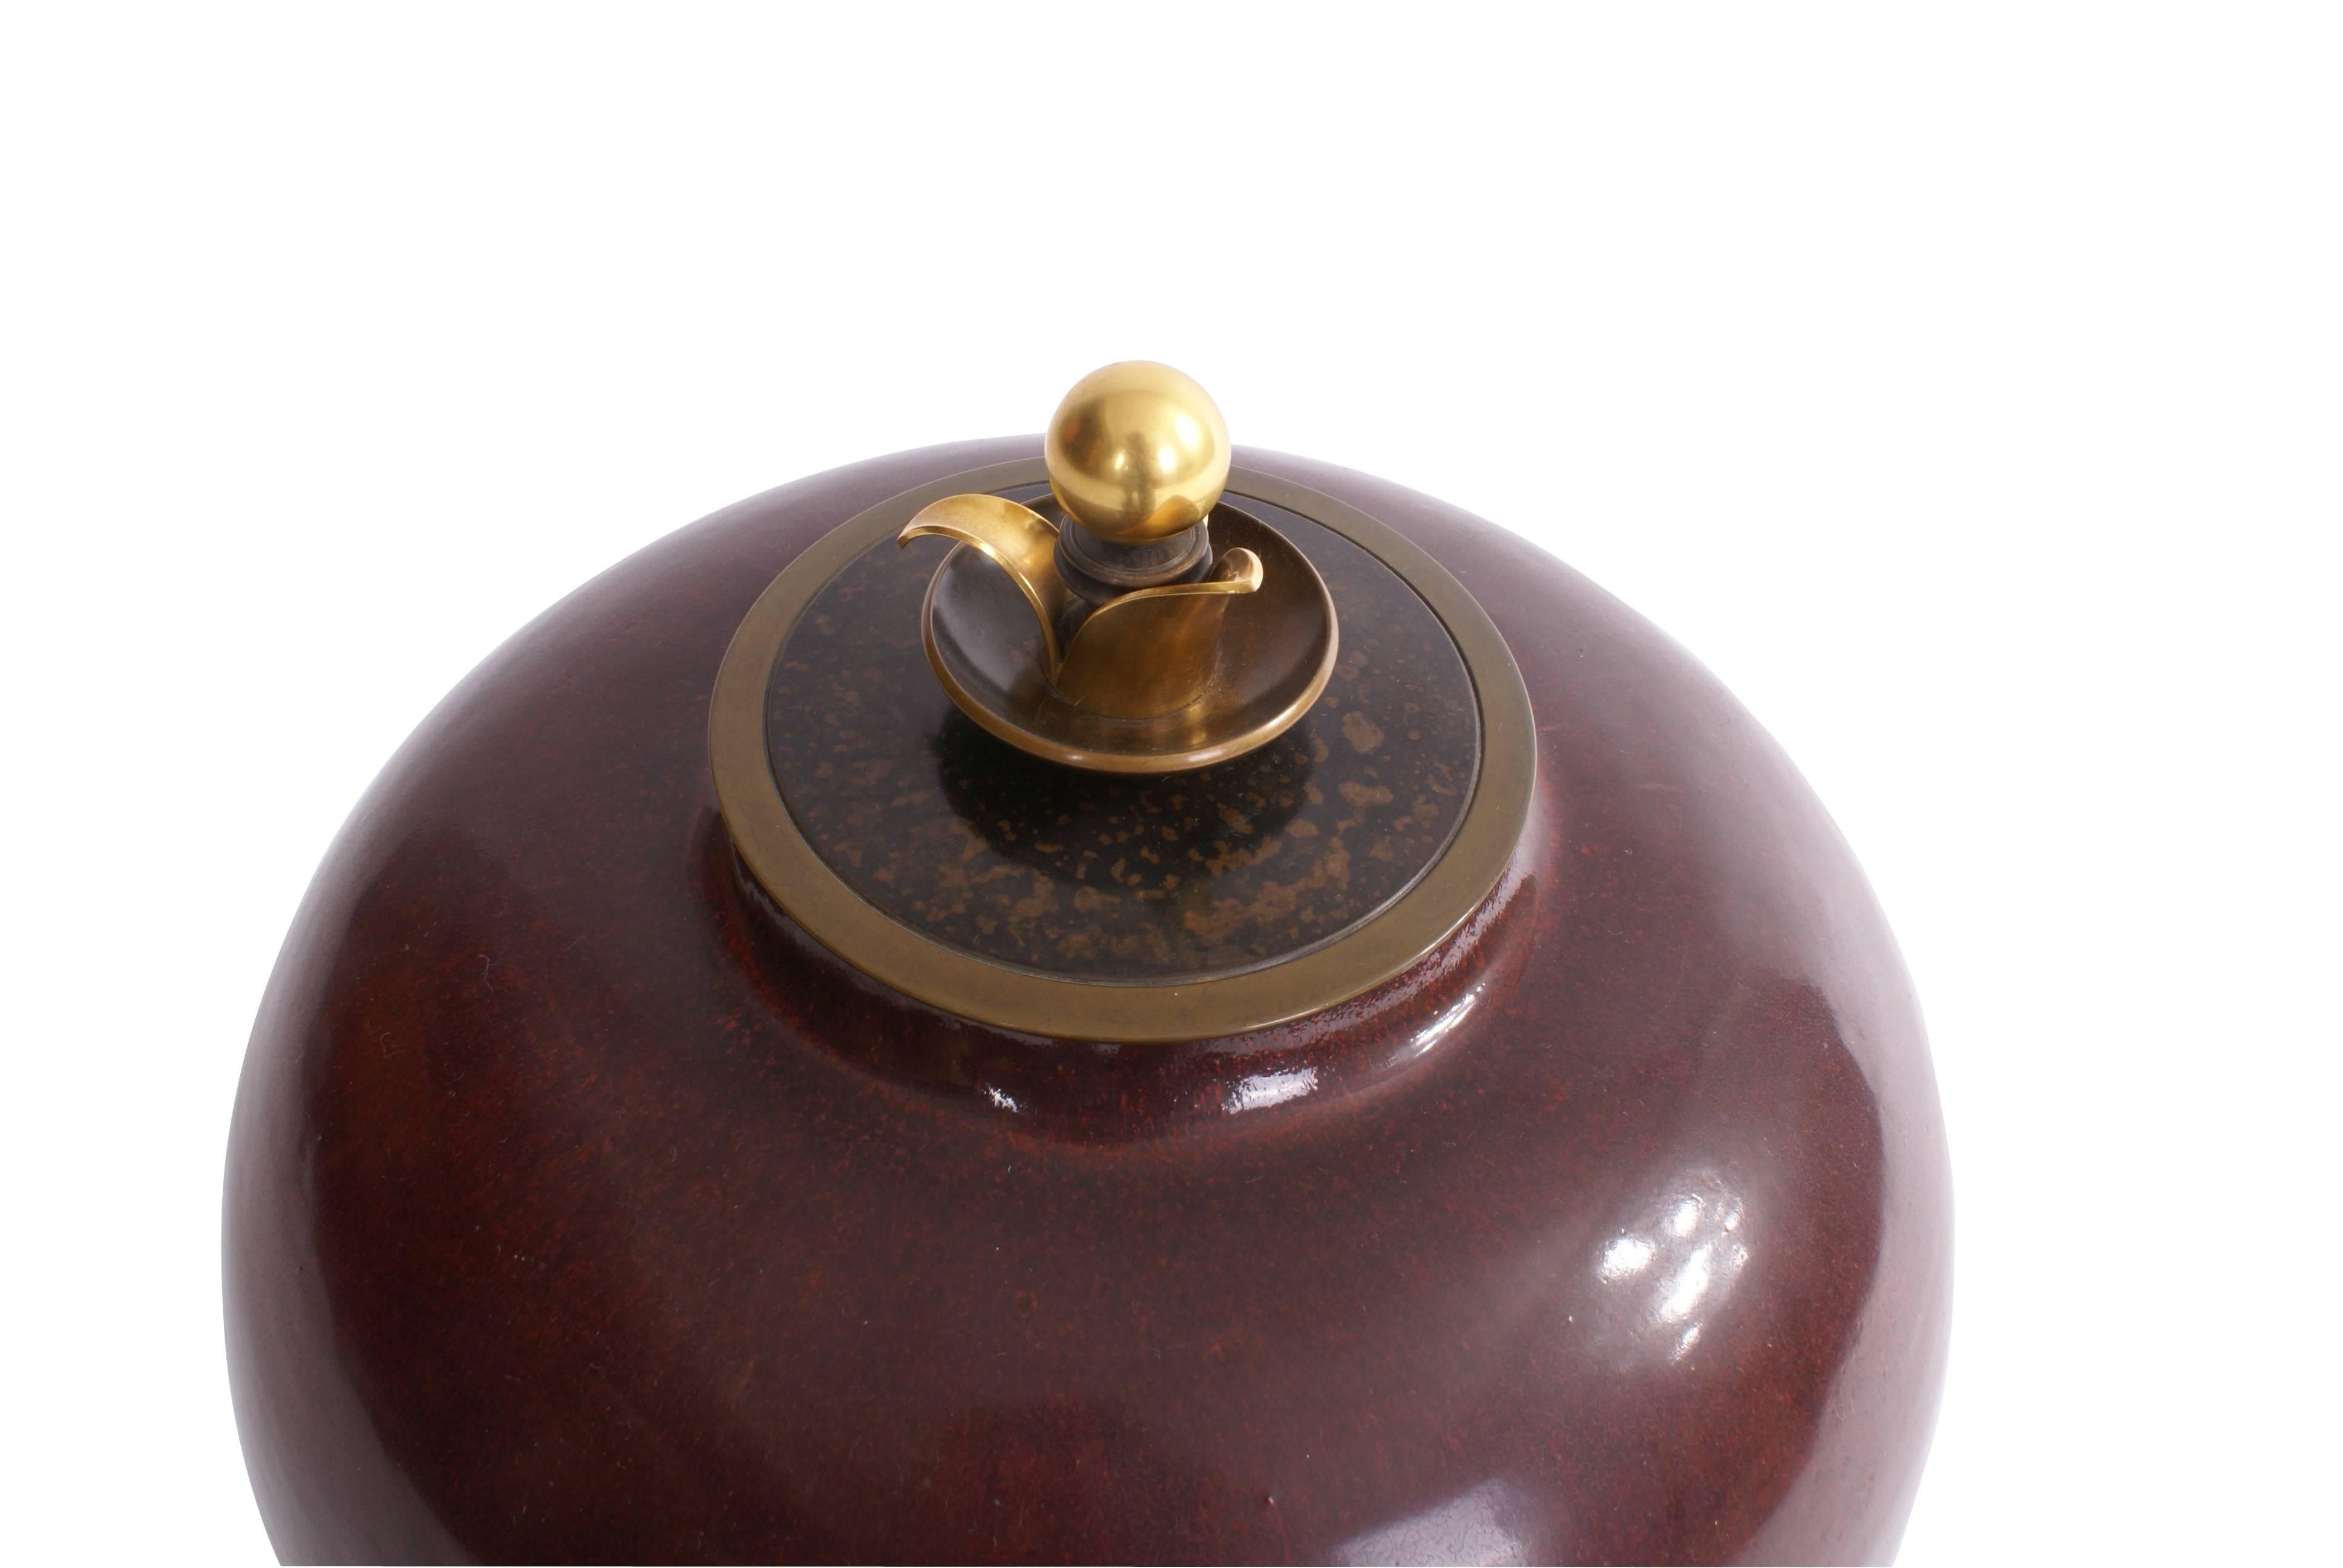 Large Kresten Bloch stoneware jar decorated with oxblood glaze with lid and Stand. Lid and Stand of patinated and partly gilded bronze. Stamped monogram KA for Knud Andersen. Royal Copenhagen. This piece is unique.

Signed monogram. 'Royal